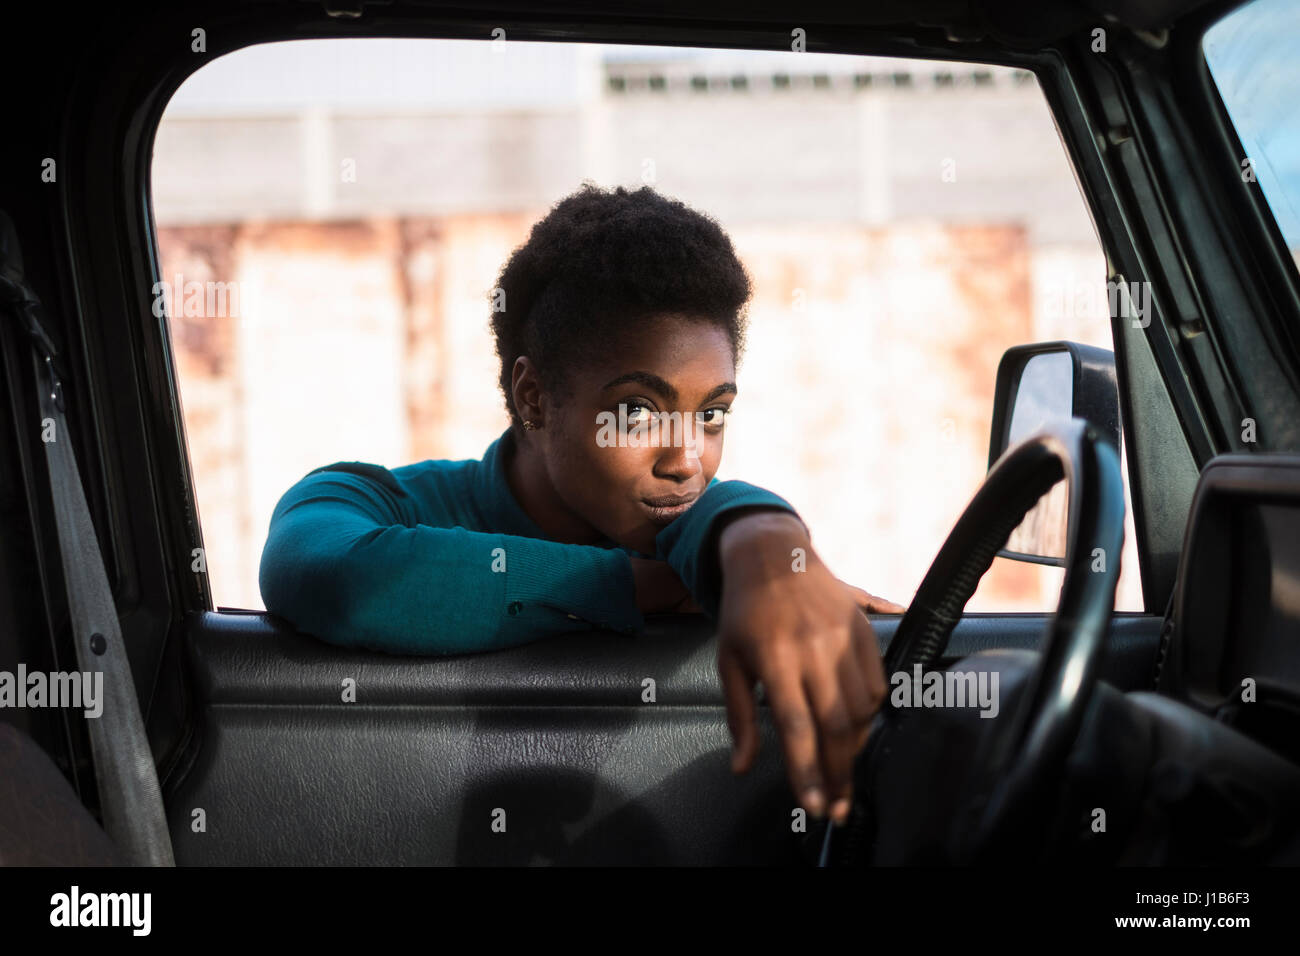 African American Woman leaning on car window Banque D'Images